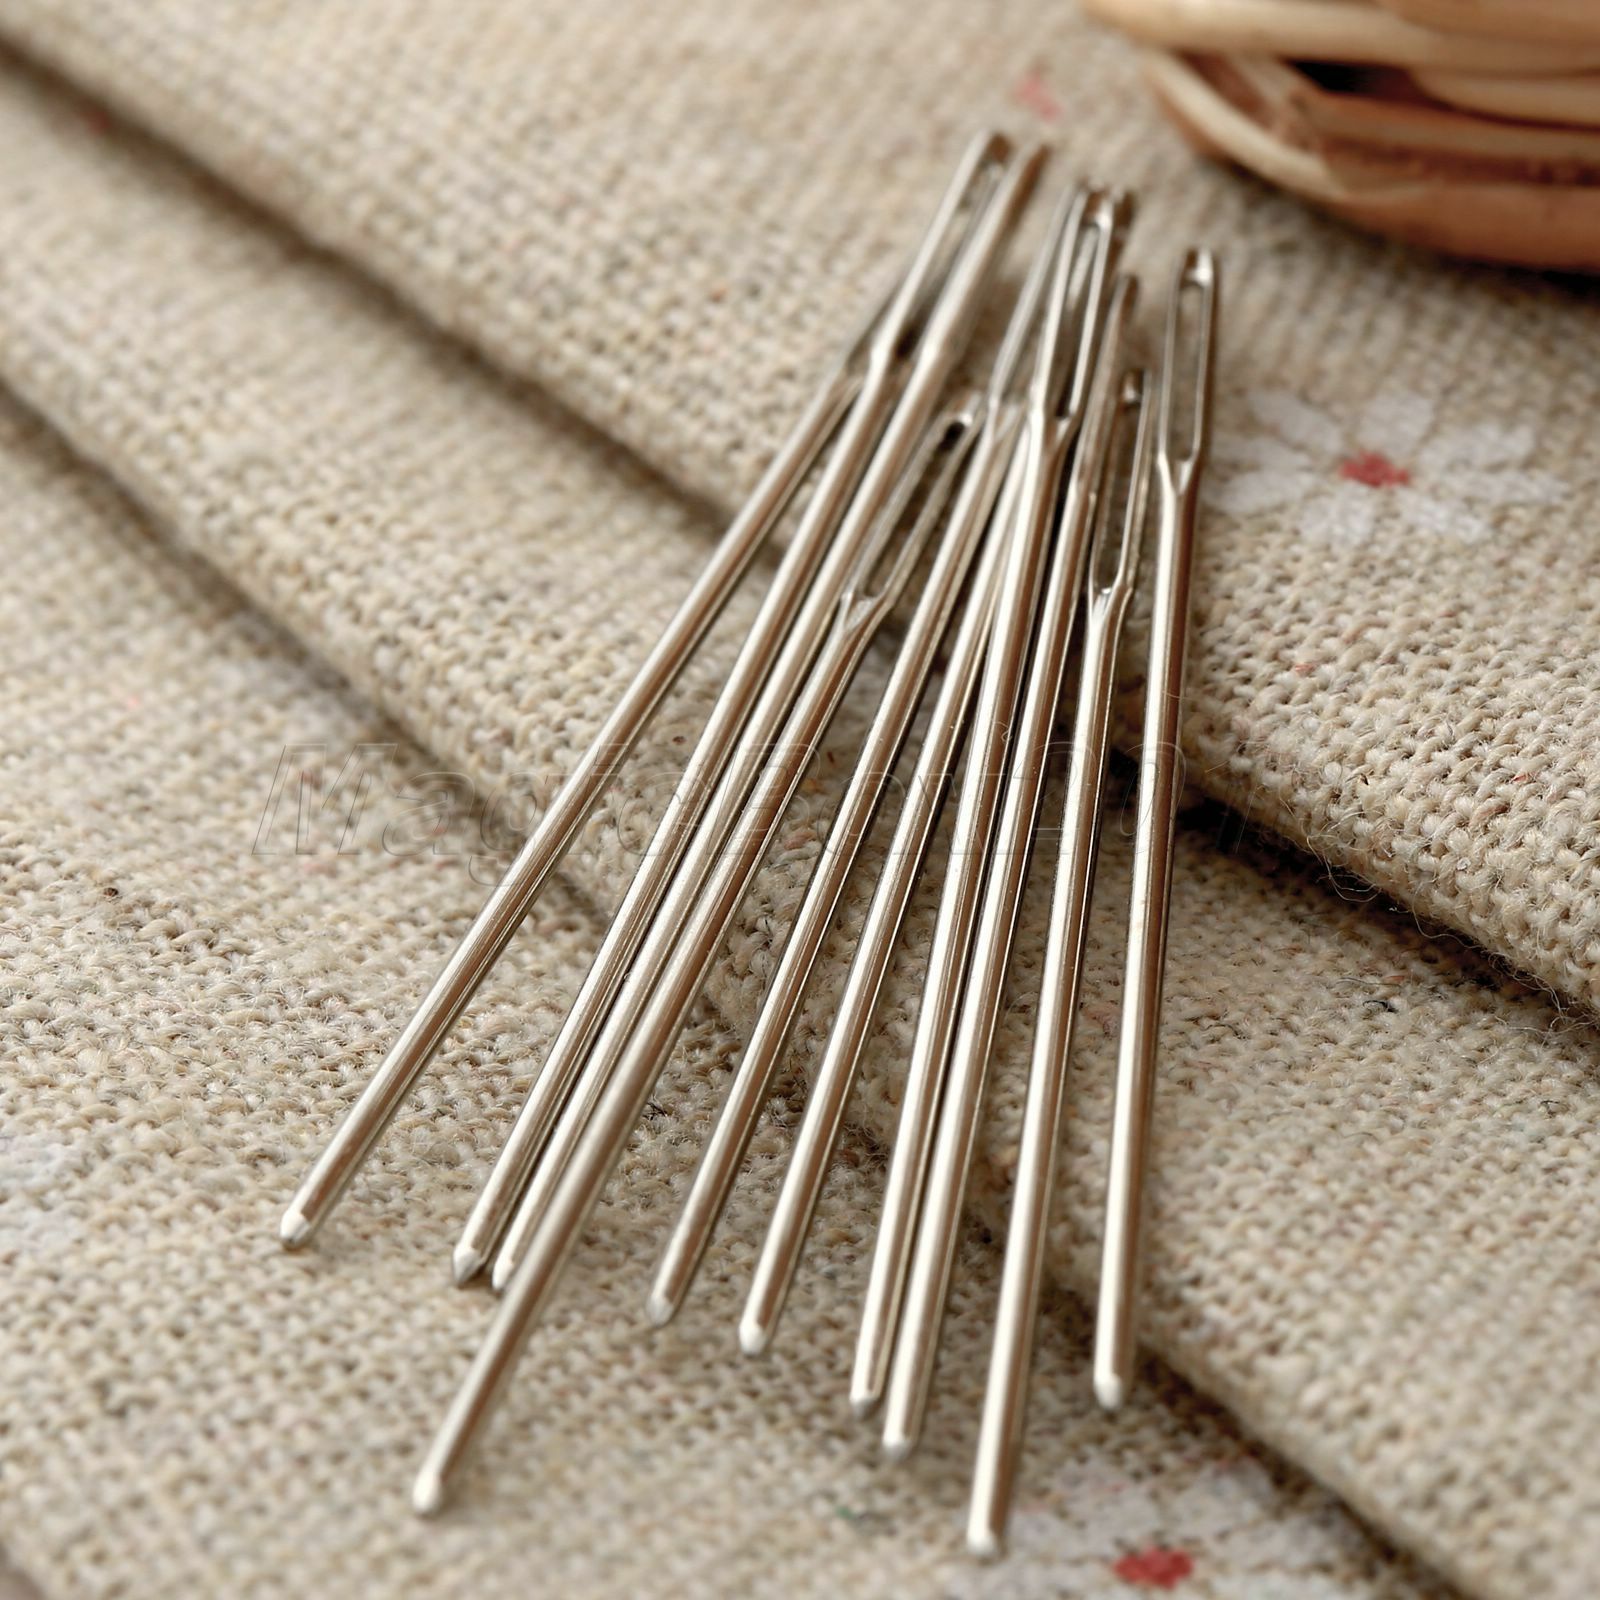 40PCS Knitters Wool Needles Large Eye For Threading Darning Sewing Embroidery